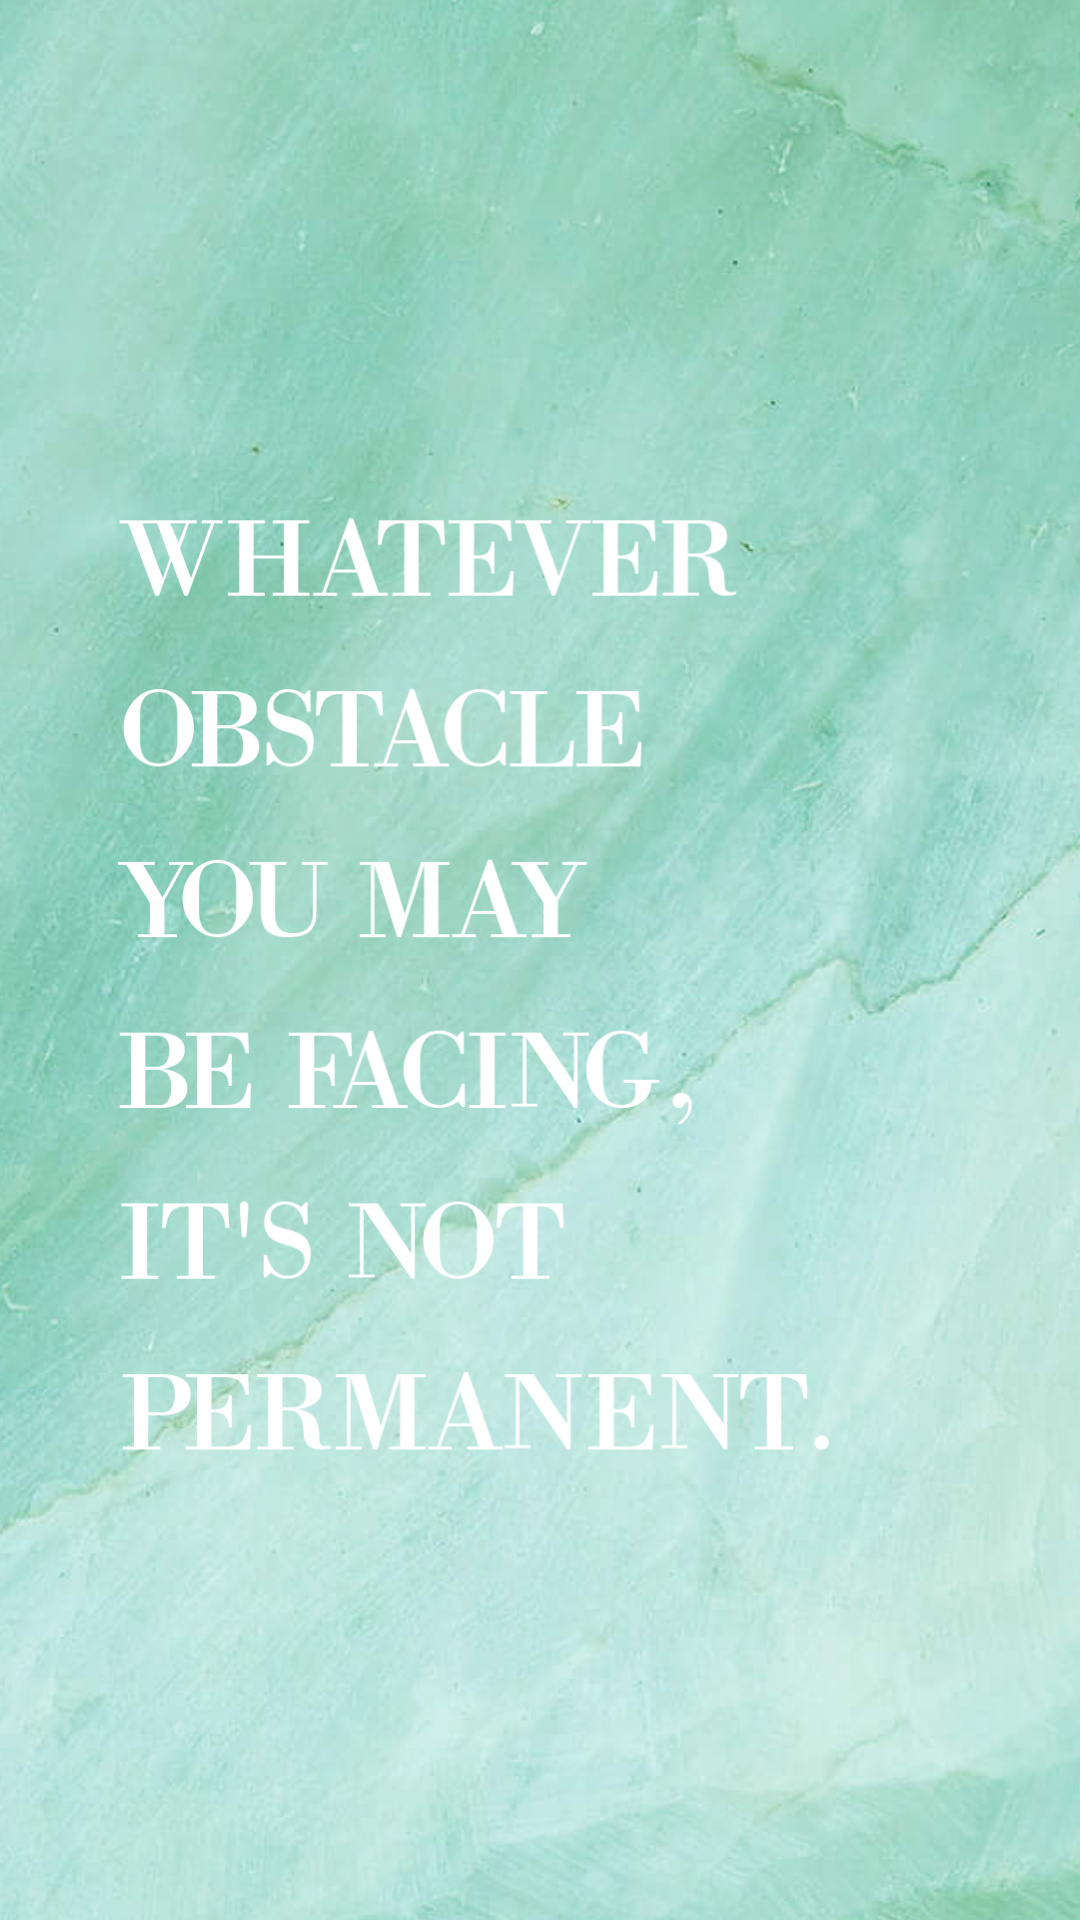 Quote about obstacles - quote about things not being permanent - this too shall pass.